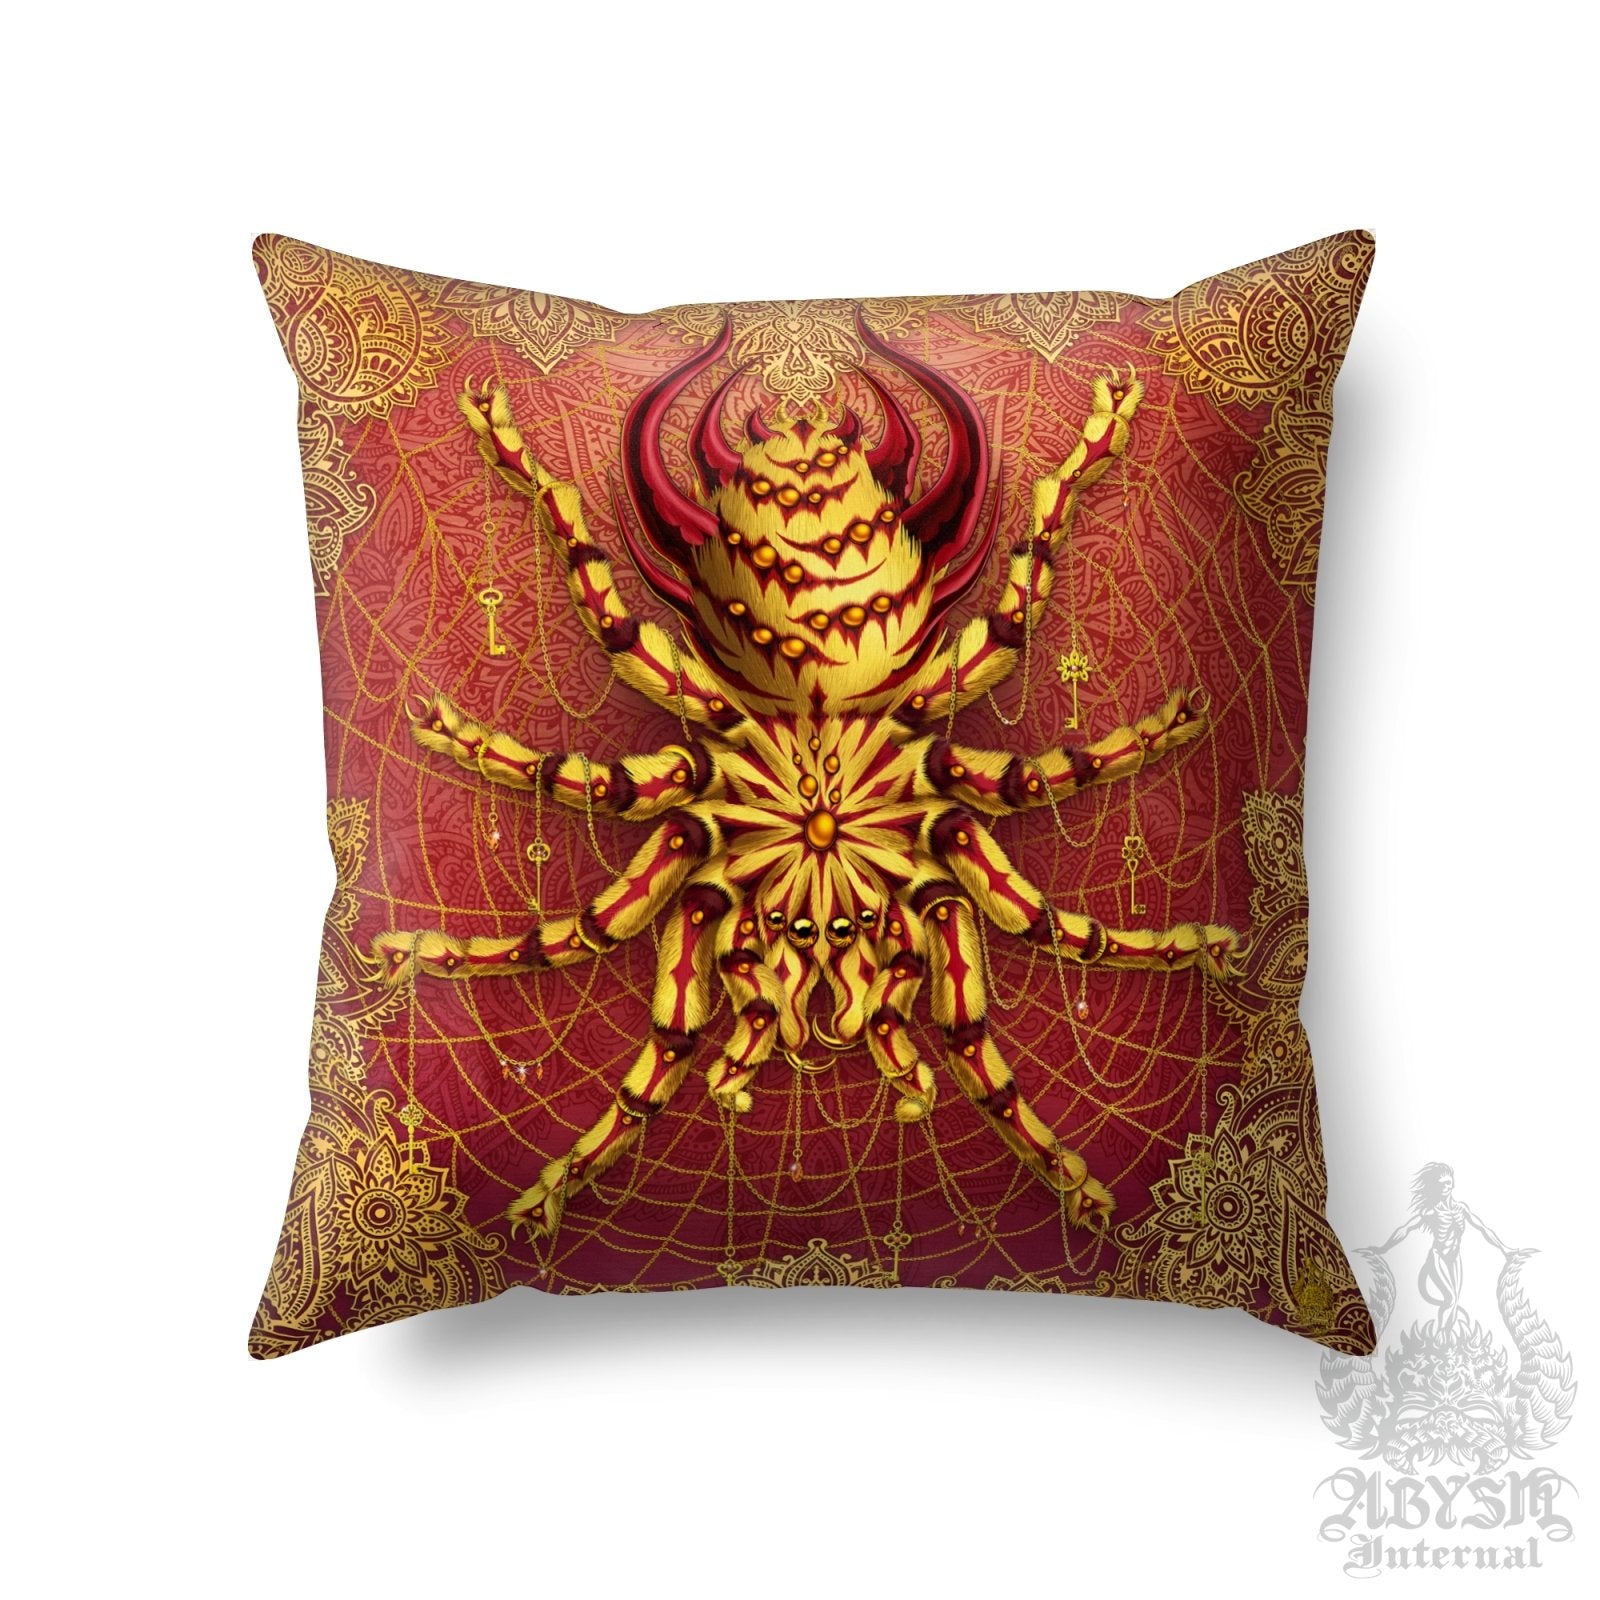 Boho Throw Pillow, Decorative Accent Cushion, Indie Room Decor, Funky and Eclectic Home - Tarantula, Spider - Abysm Internal